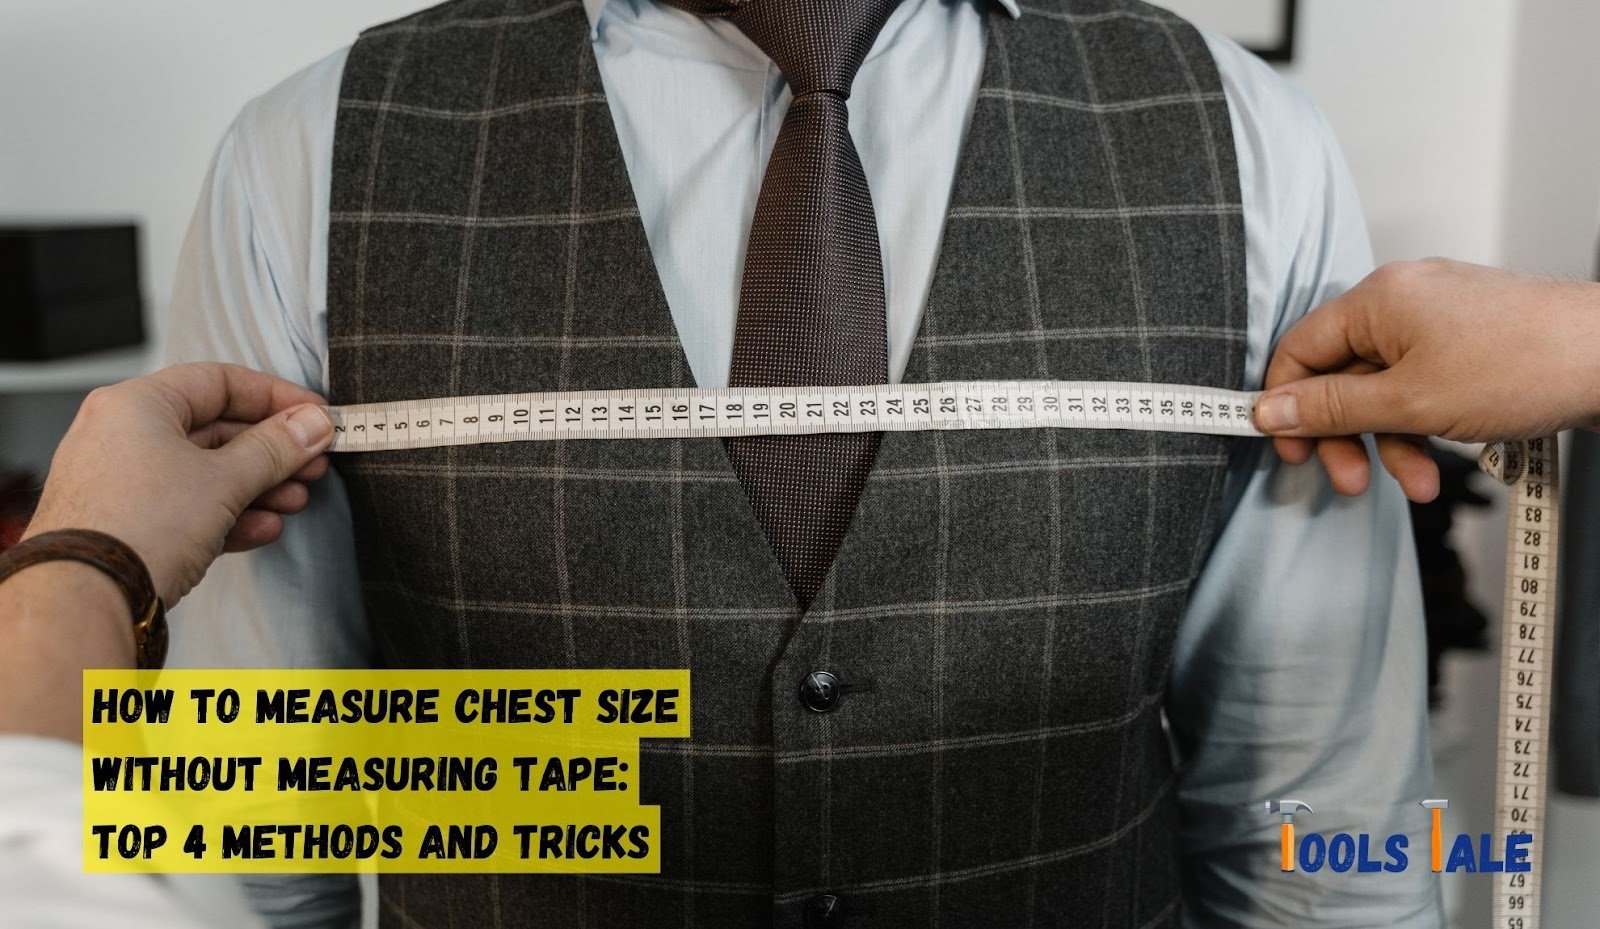 How to Measure Chest Size Without Measuring Tape